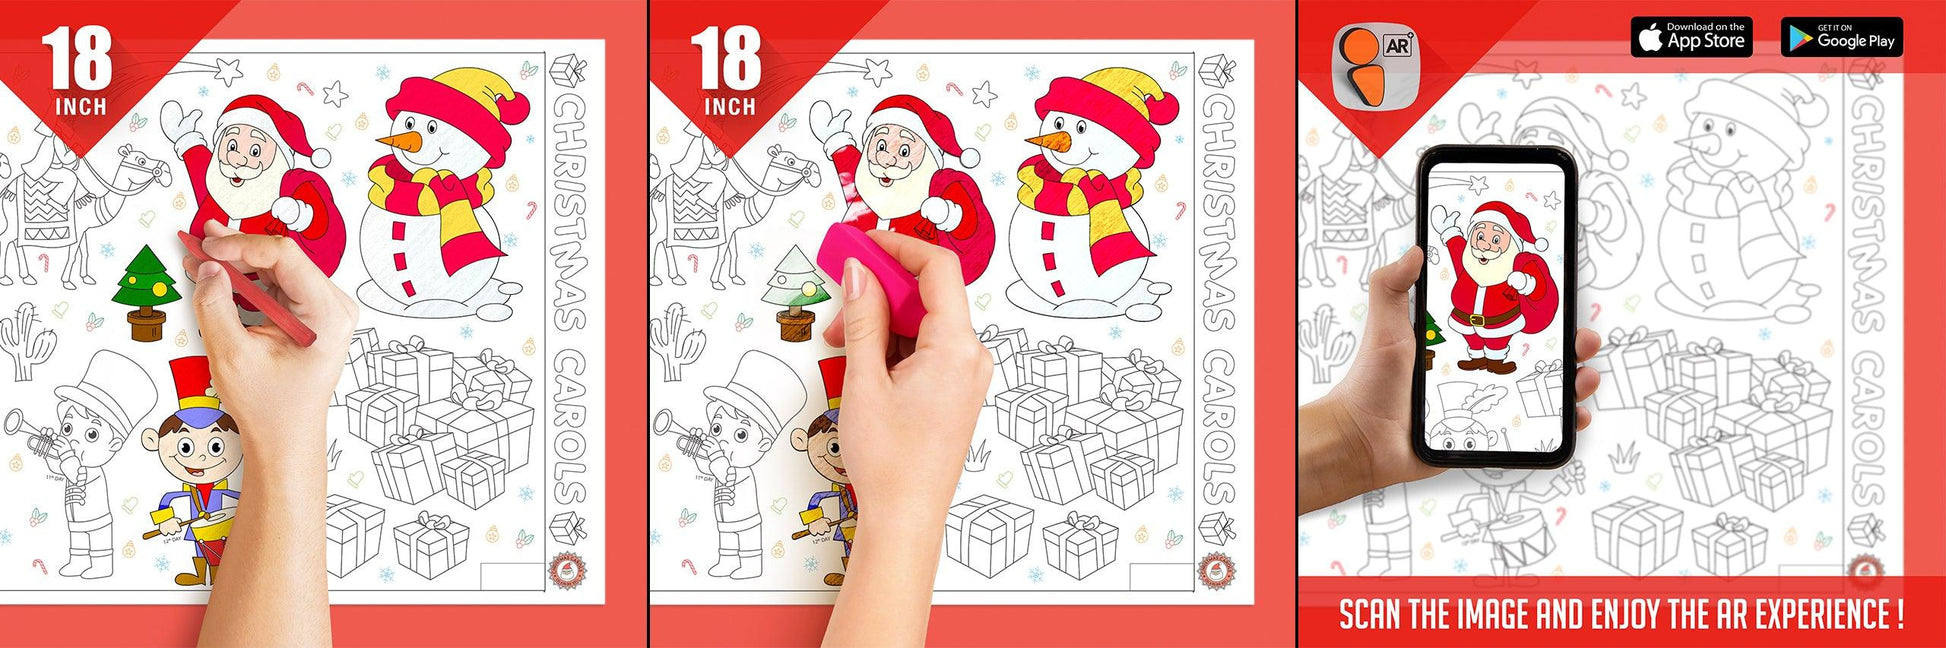 The image displays three pictures: the first one shows a hand colouring Christmas carols roll, the second one depicts the color being erased from the board, and the third one features a hand holding a mobile phone in front of the Christmas carols picture